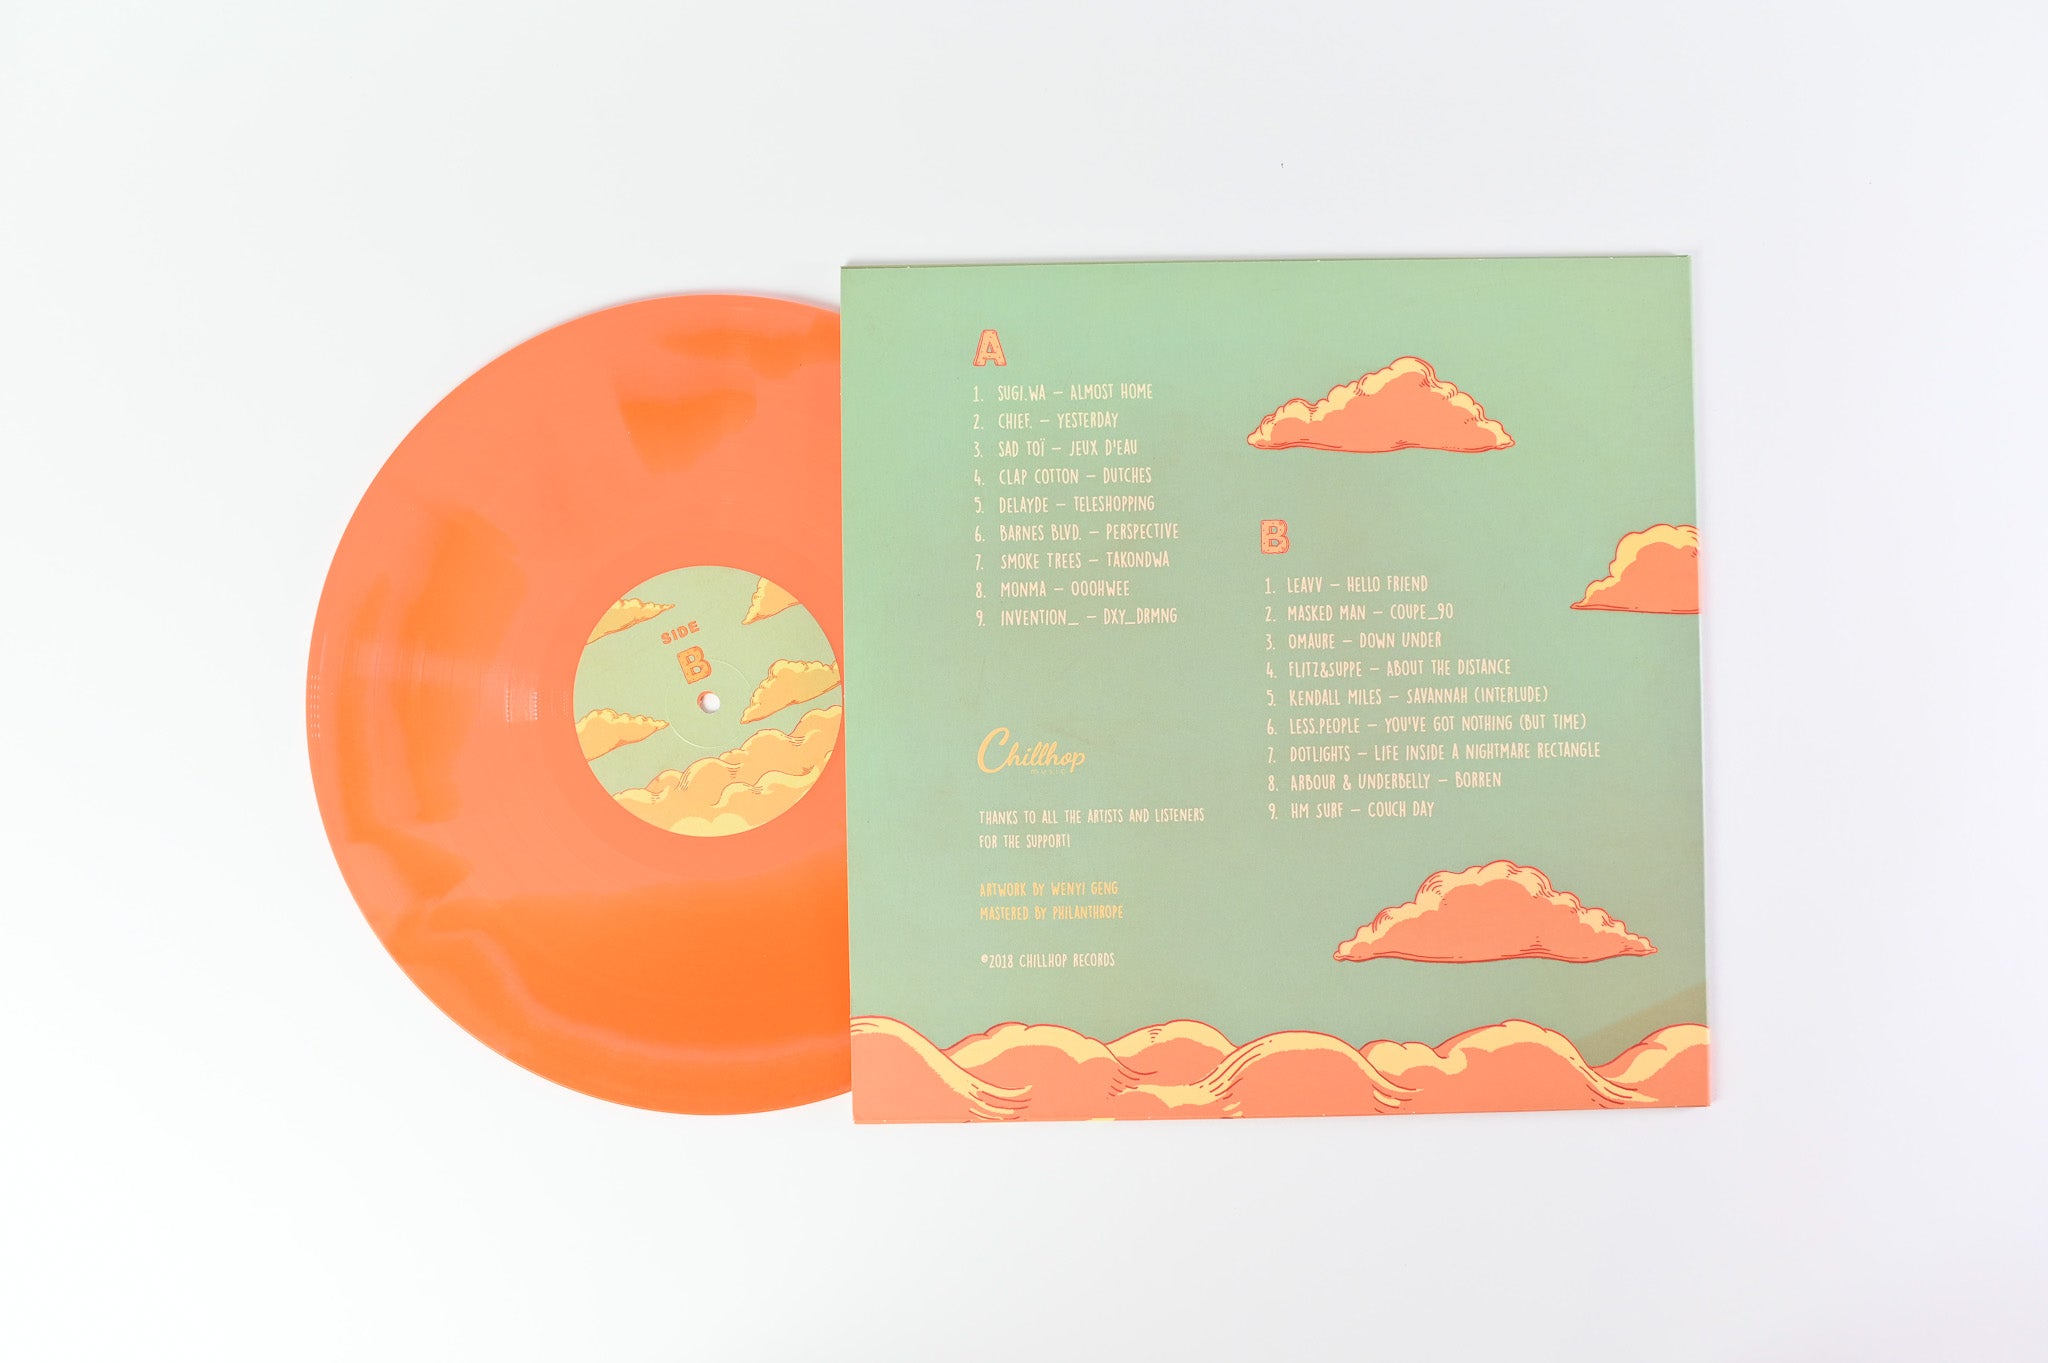 Various - Daydreams on Chillhop Ltd Numbered Orange Clouded